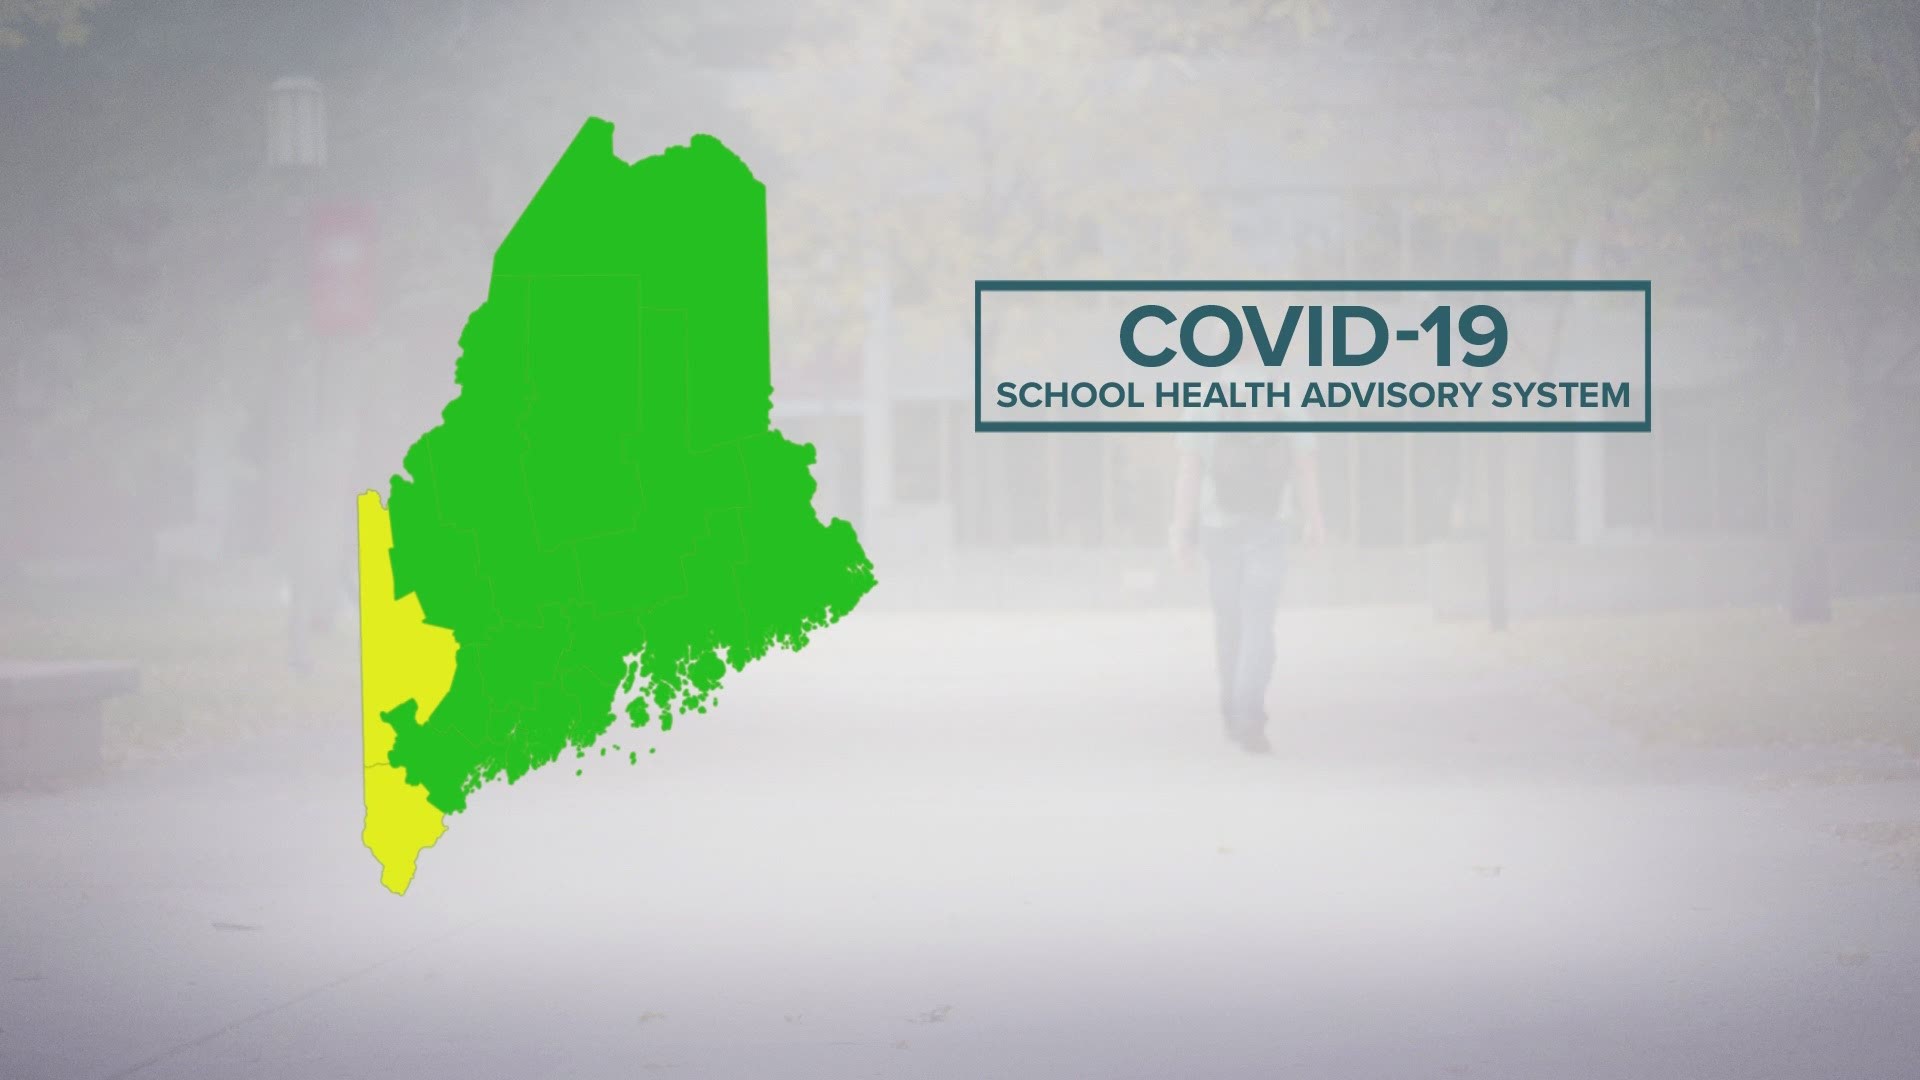 20 additional cases of COVID-19 cases reported in Maine on Friday.